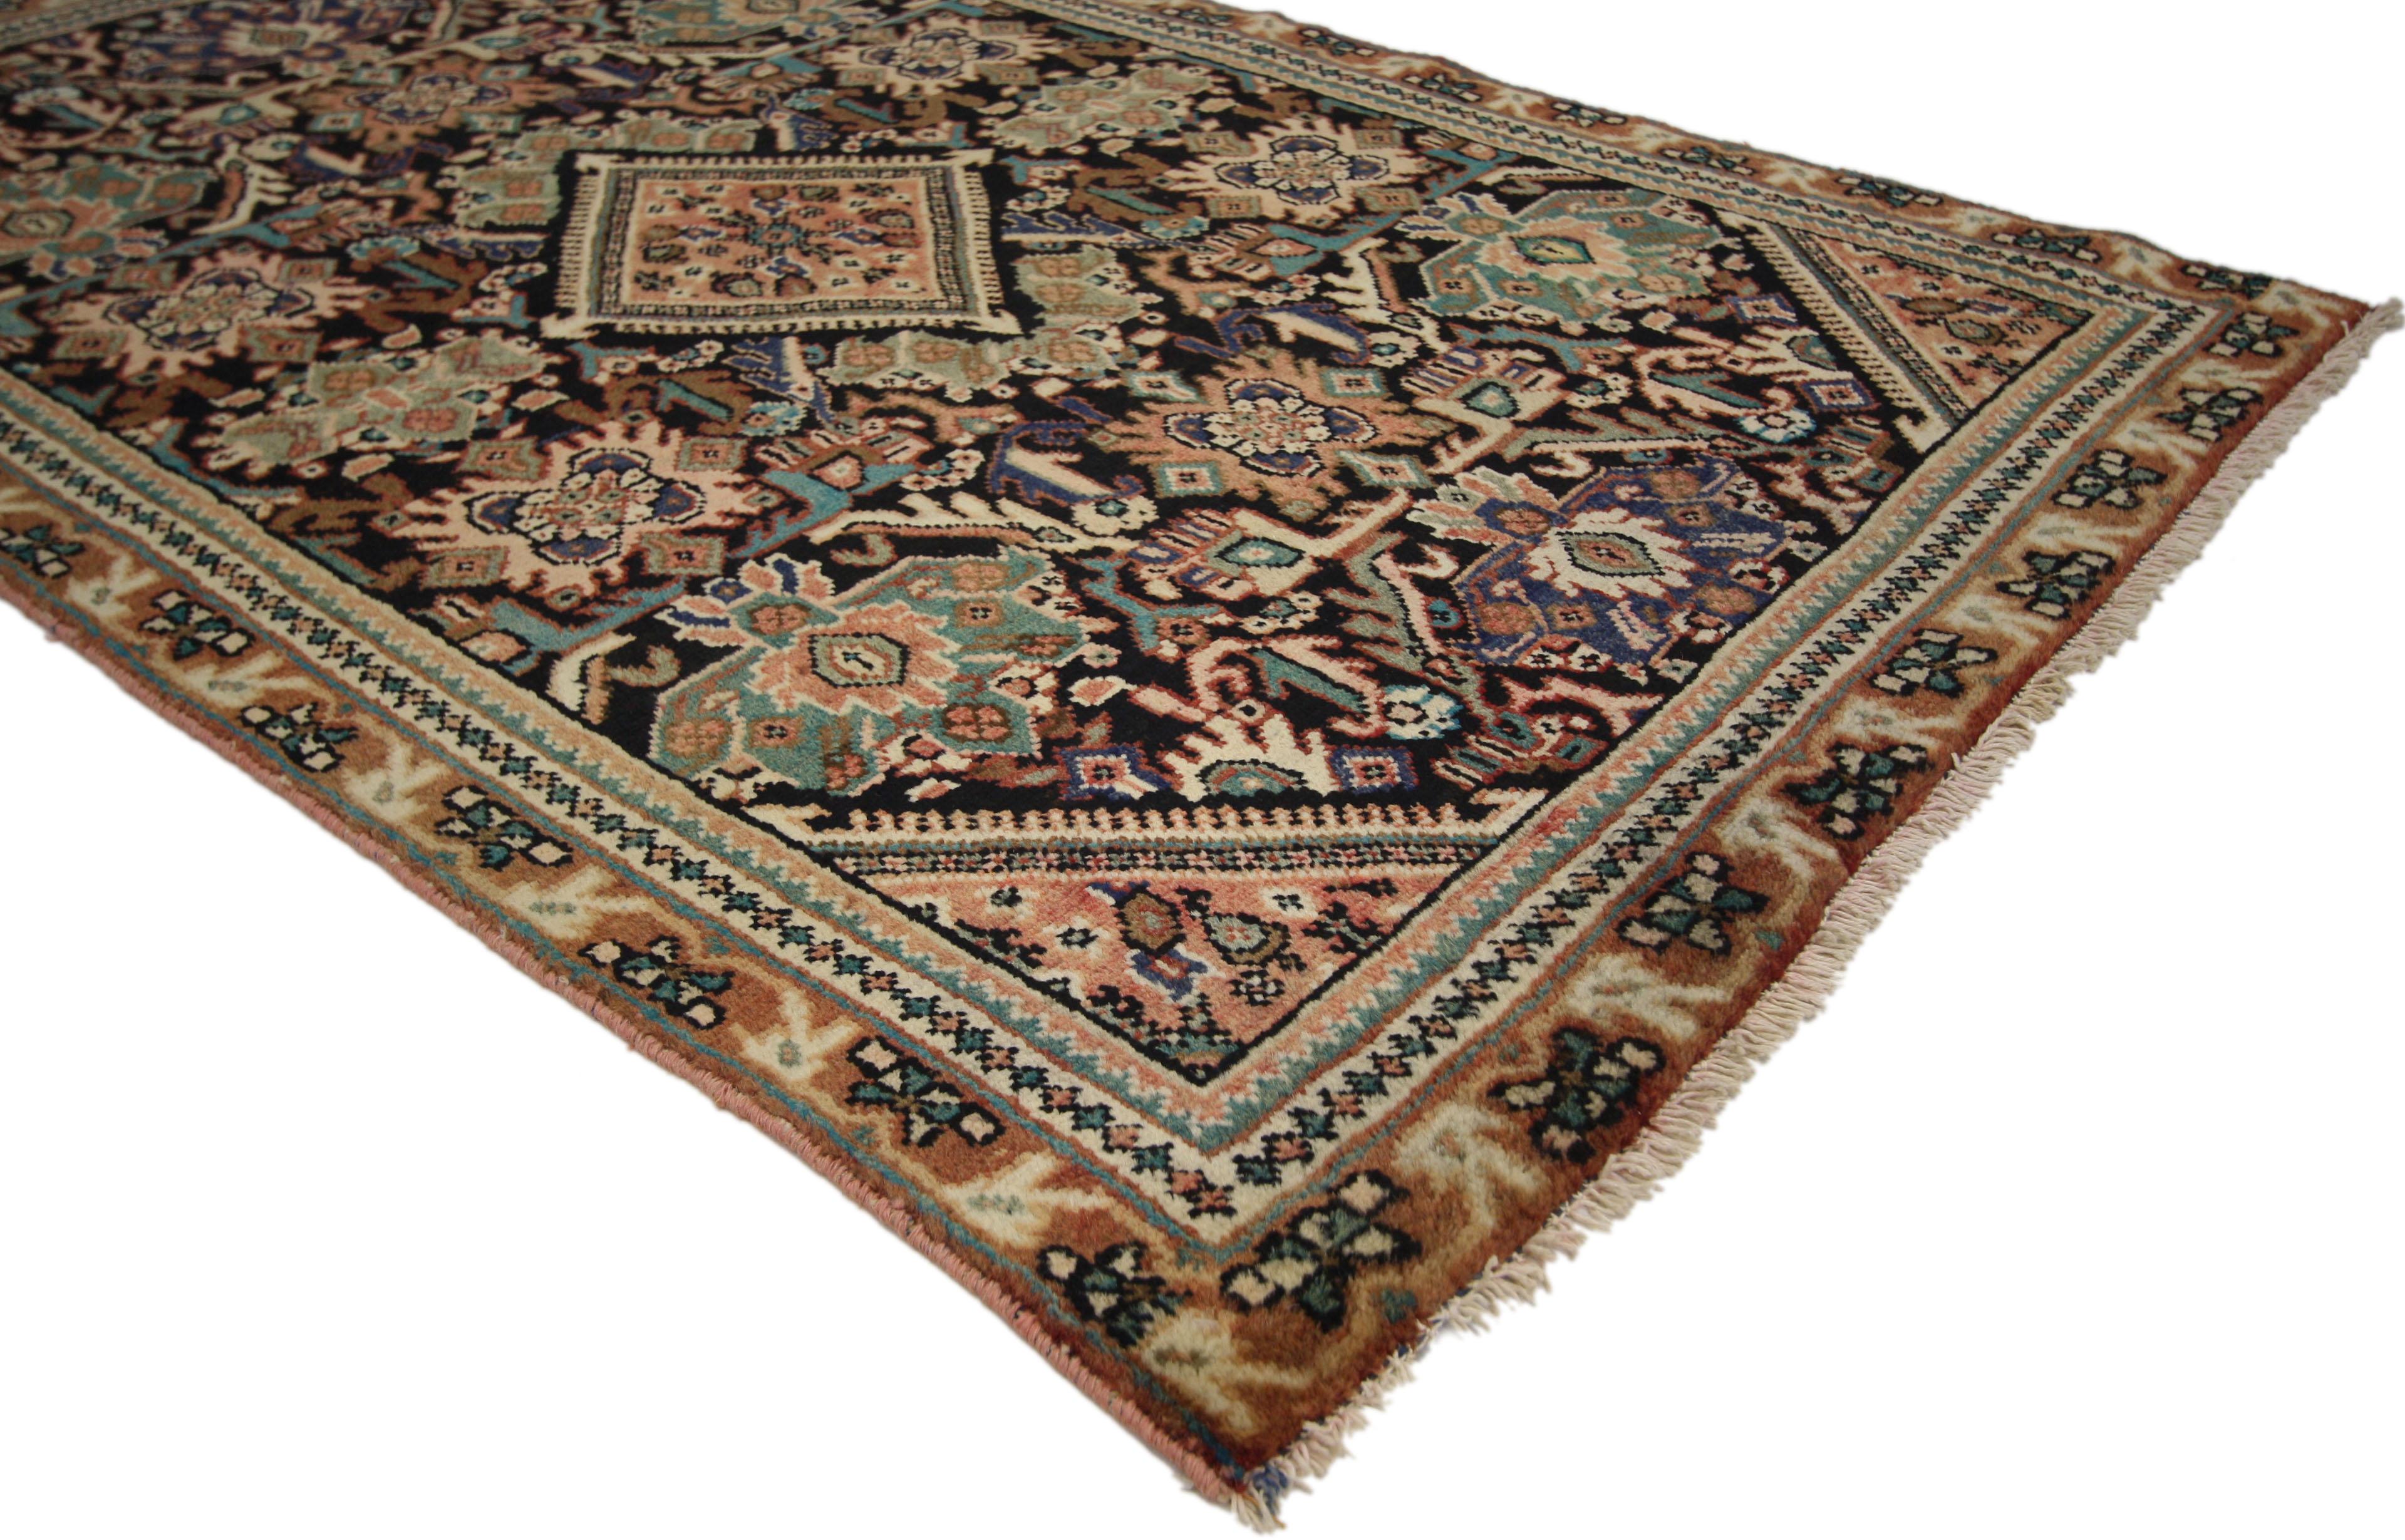 75329 Vintage Persian Mahal Rug with Traditional Style Kitchen, Foyer or Entry Rug 04'01 X 06'07. This hand-knotted wool vintage Persian Mahal rug features a diamond medallion with comb-like edges and complementary spandrels surrounded by